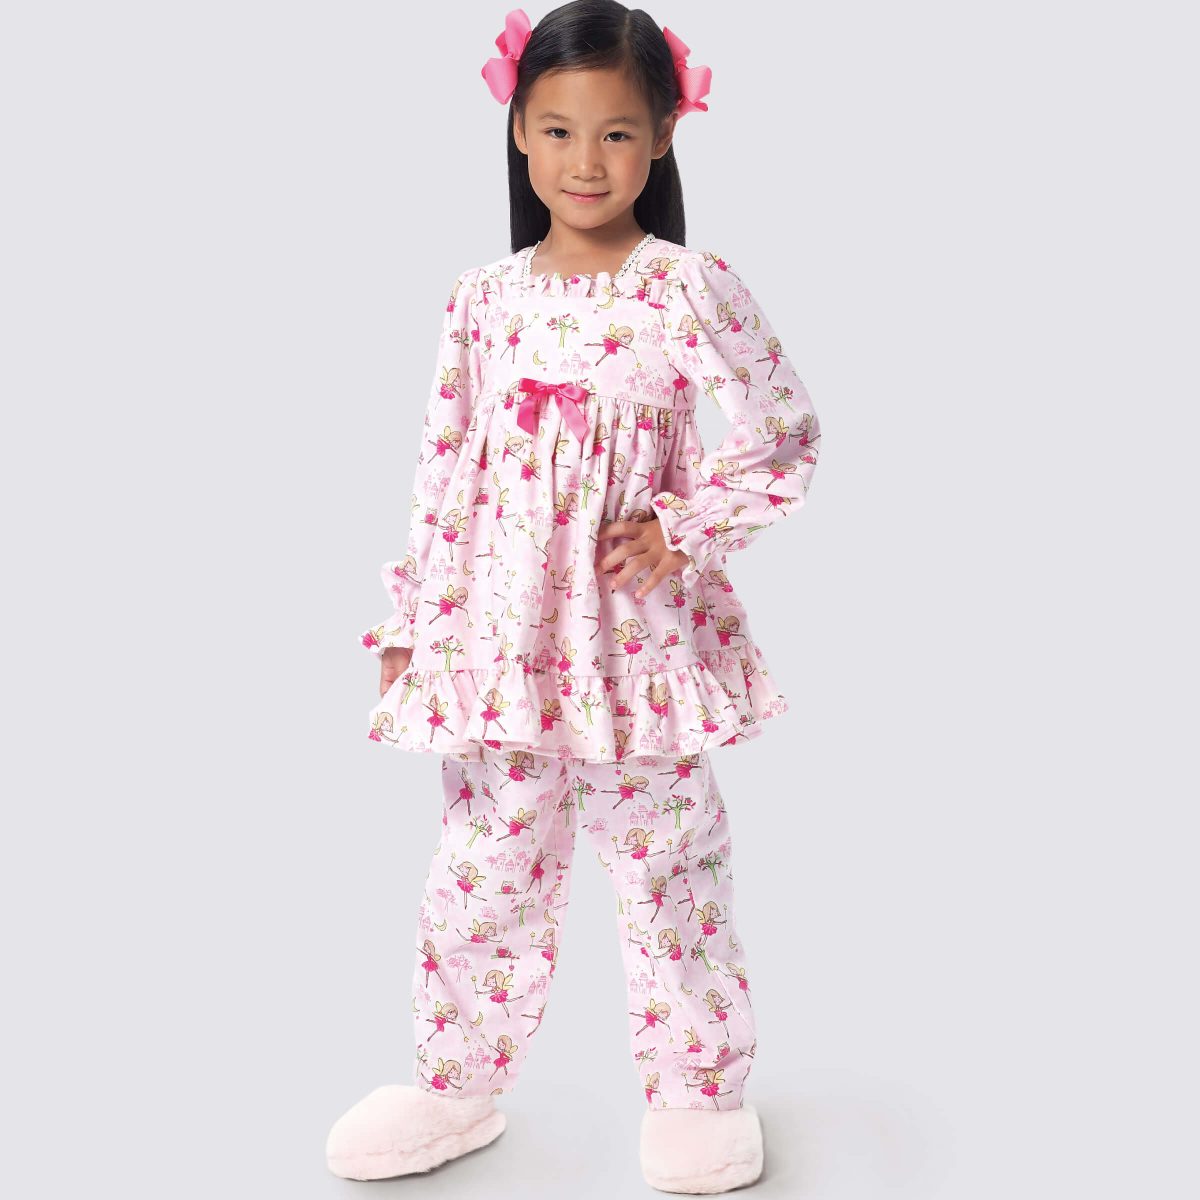 Simplicity Sewing Pattern S9204 Children's/Girls' Gathered Tops, Dresses, Gown and Trousers